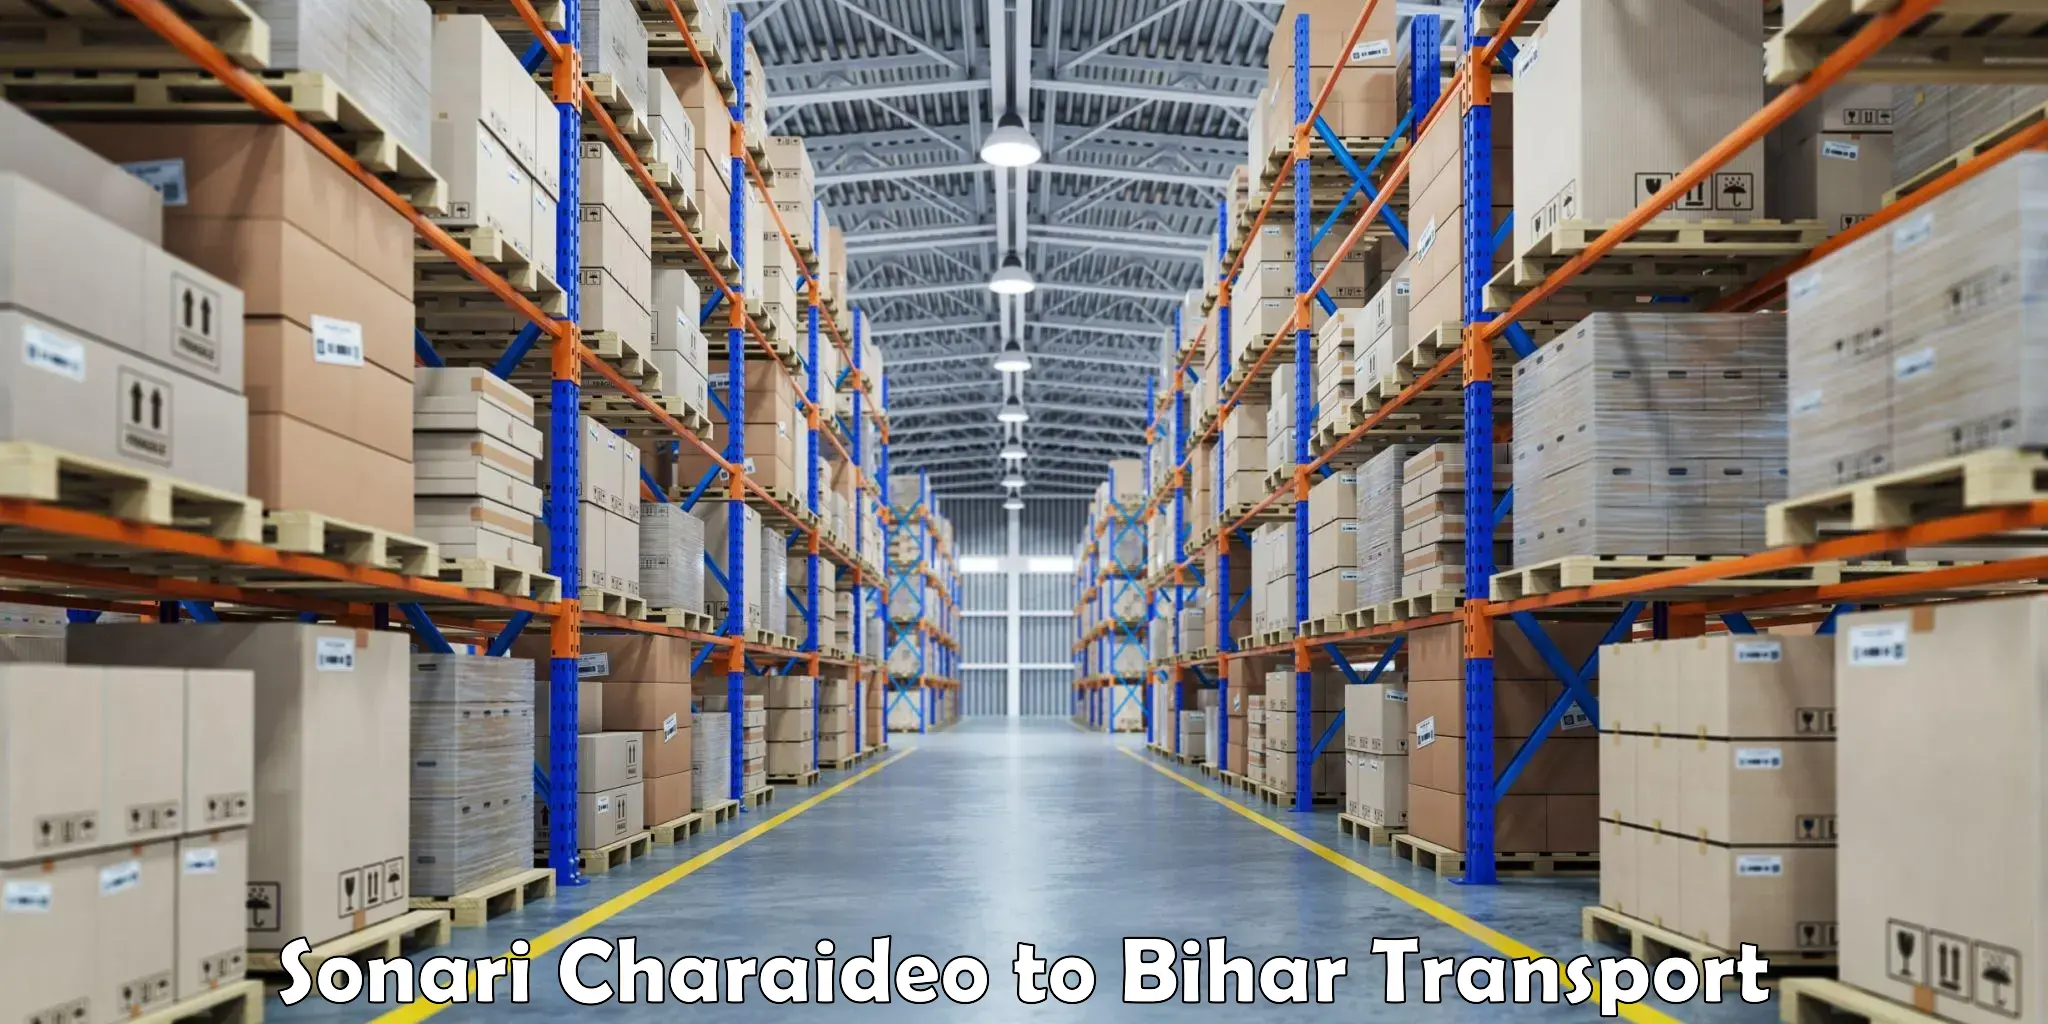 Express transport services in Sonari Charaideo to Bihar